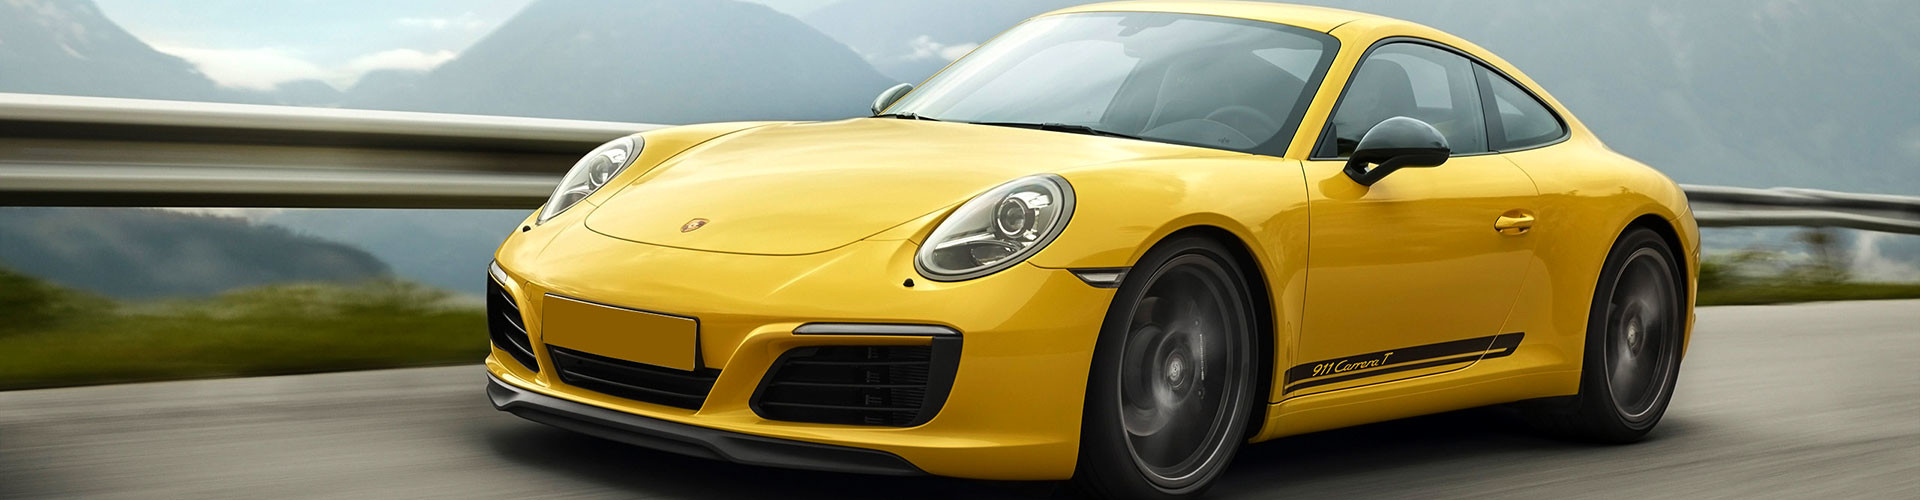 Buying a used Porsche 911 991? See our buying guide to learn what you need to know.